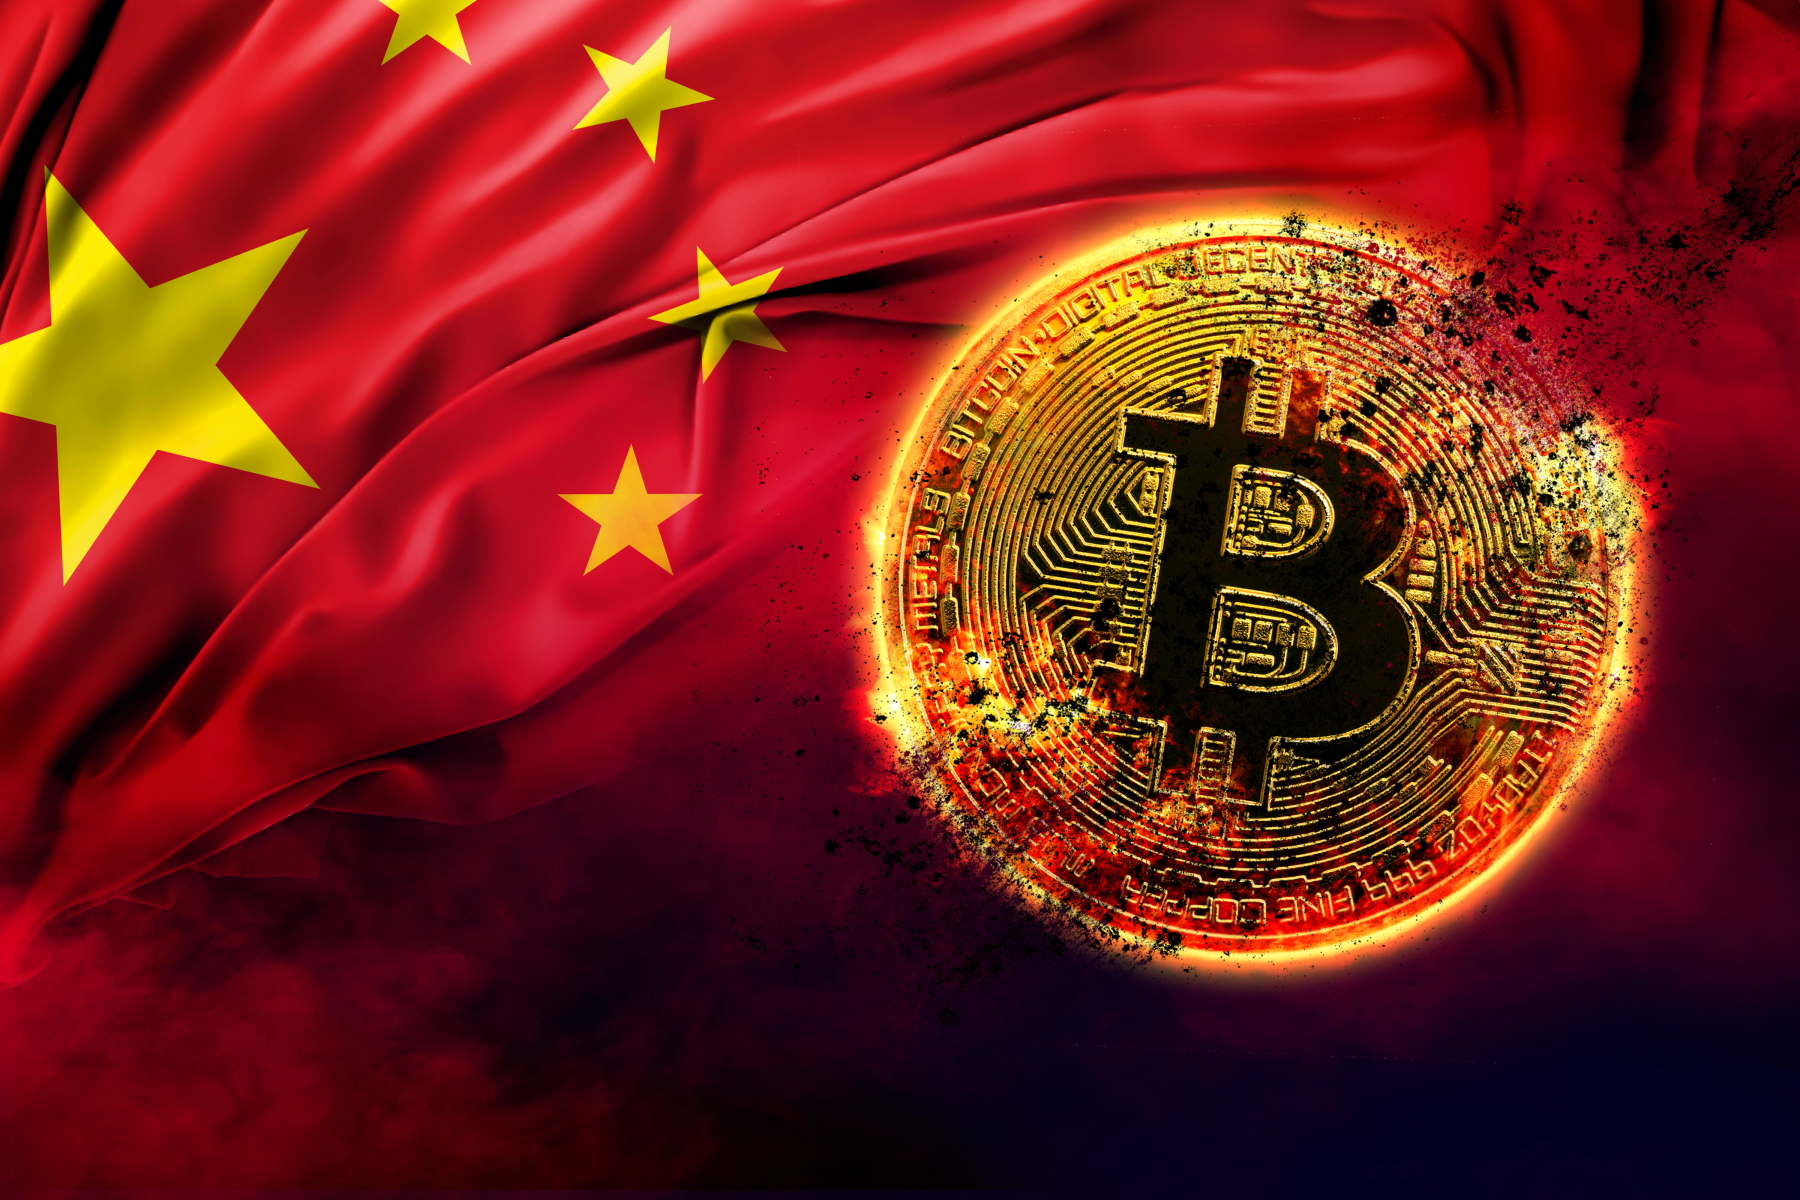 Chinese government official pleads guilty for helping Bitcoin miners
